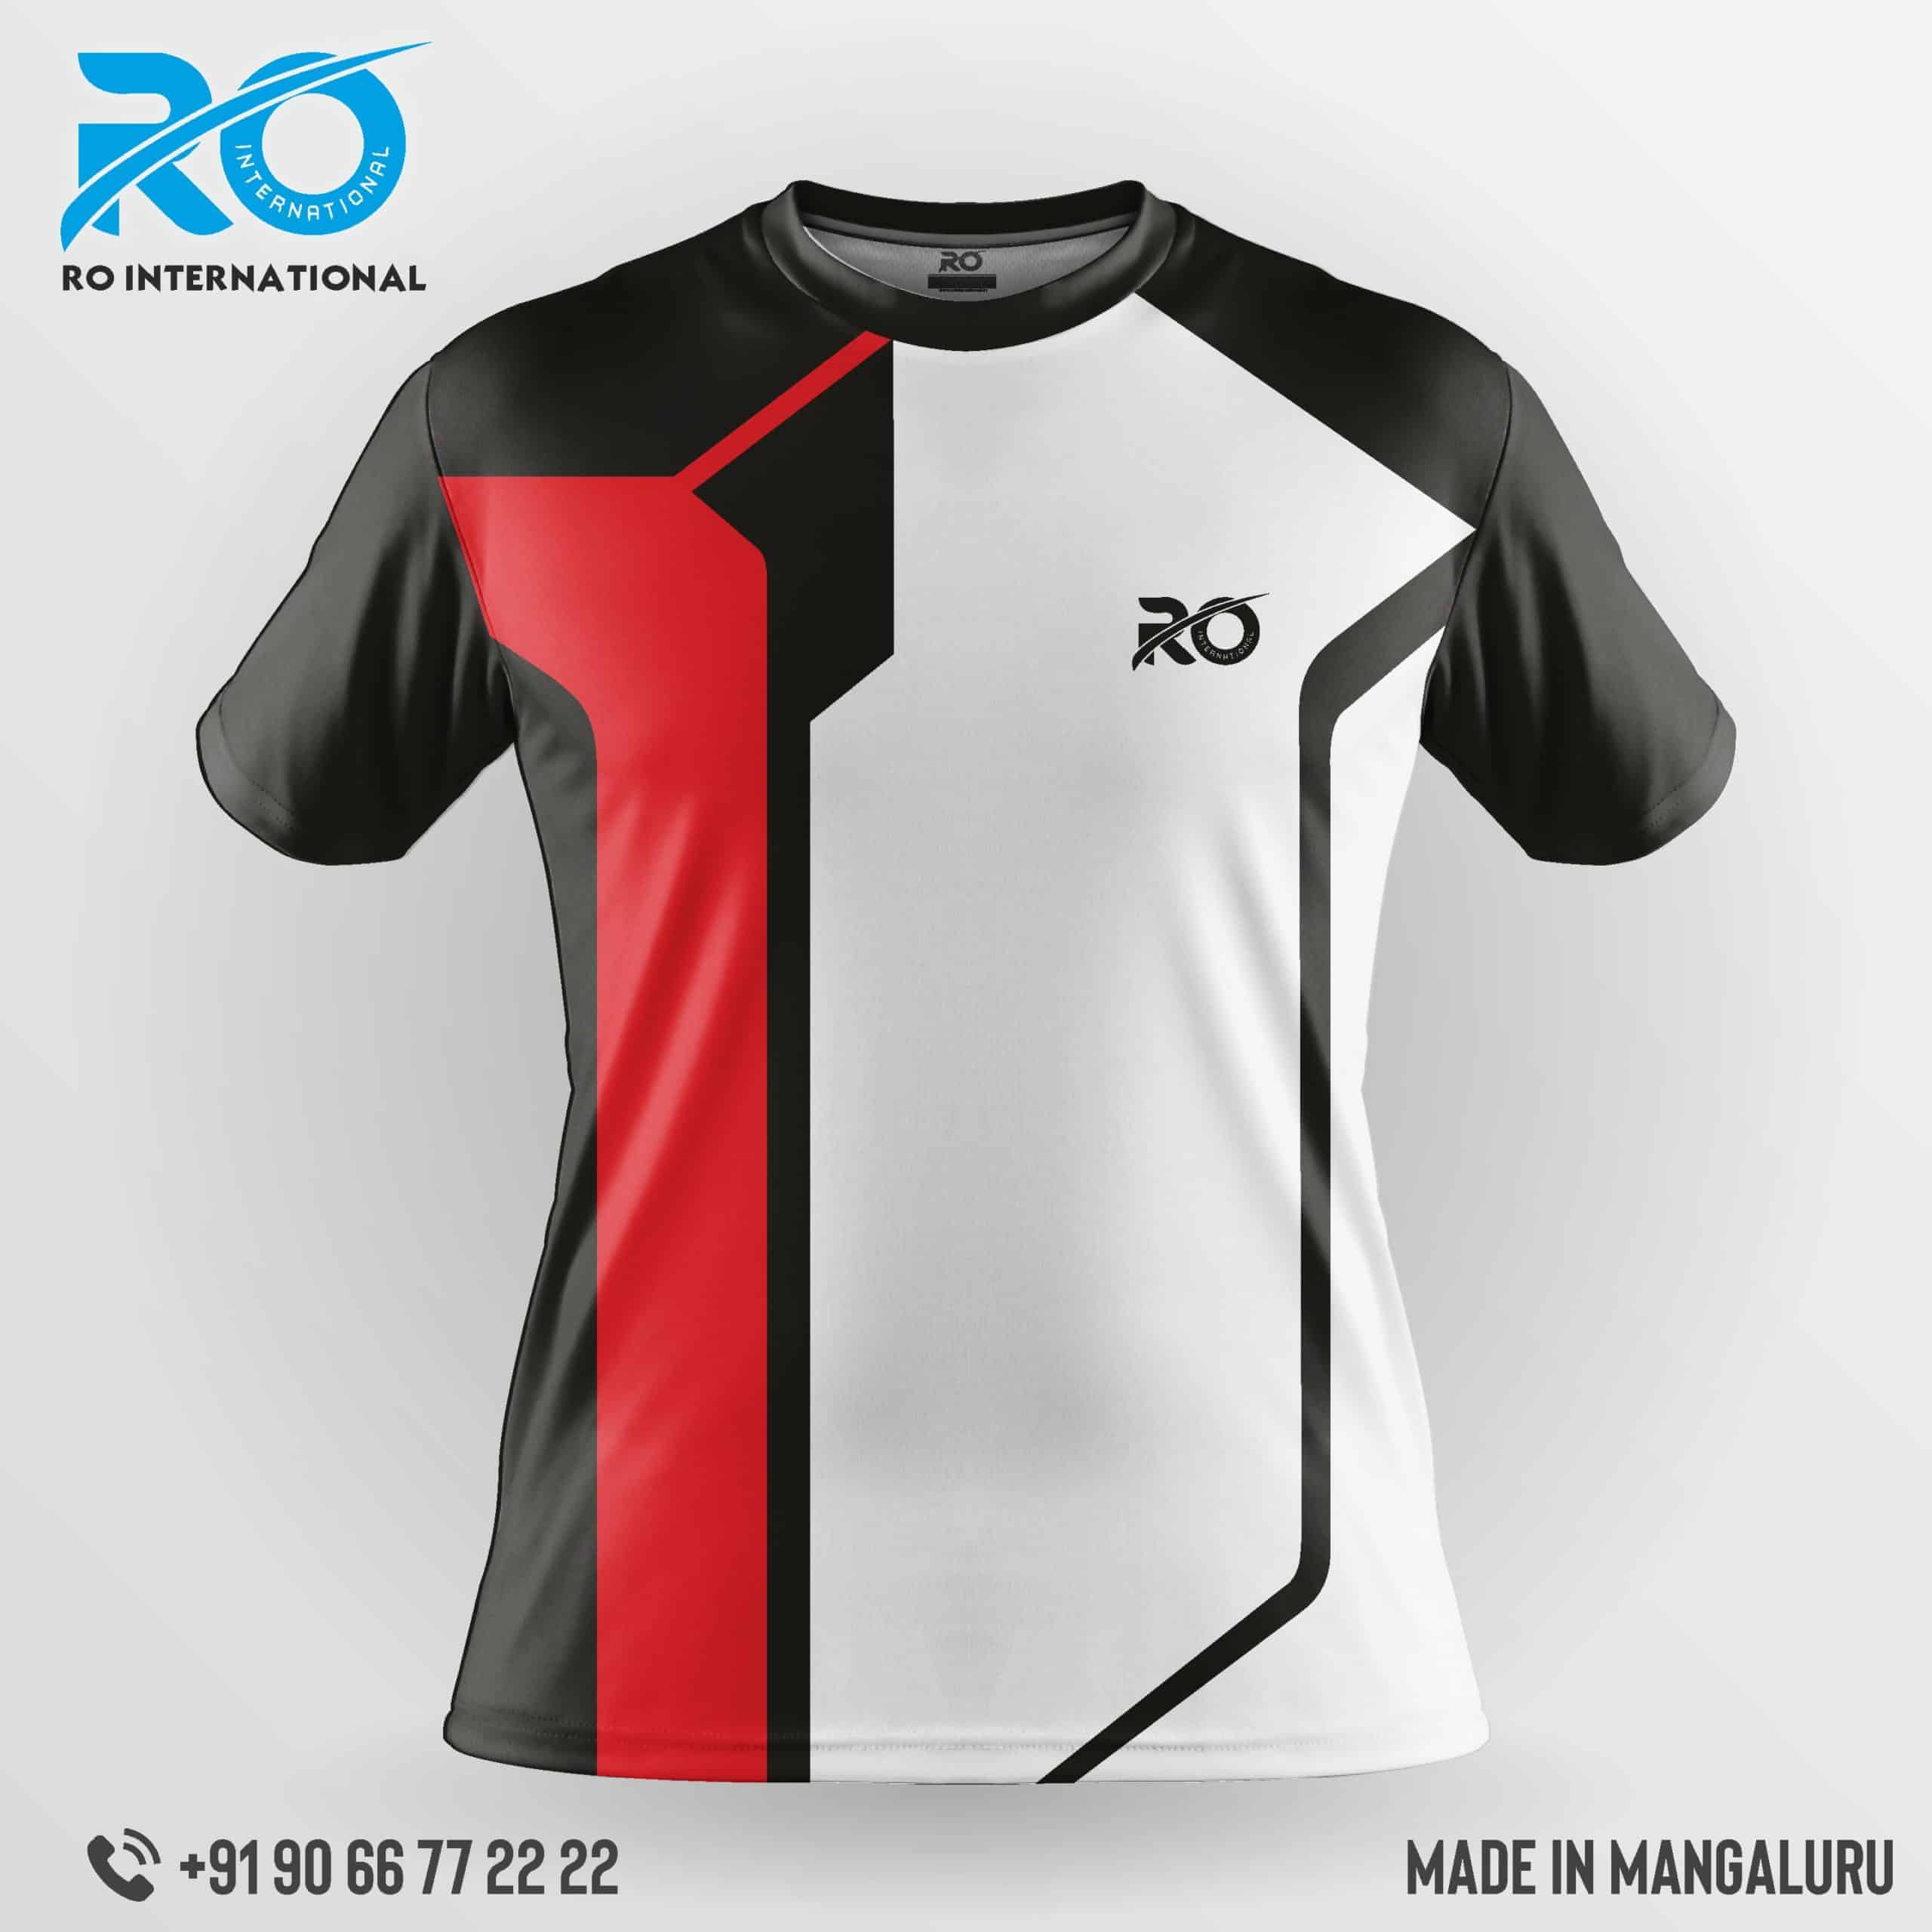 Ro FS Sublimation Jersey Black White Red - RO International